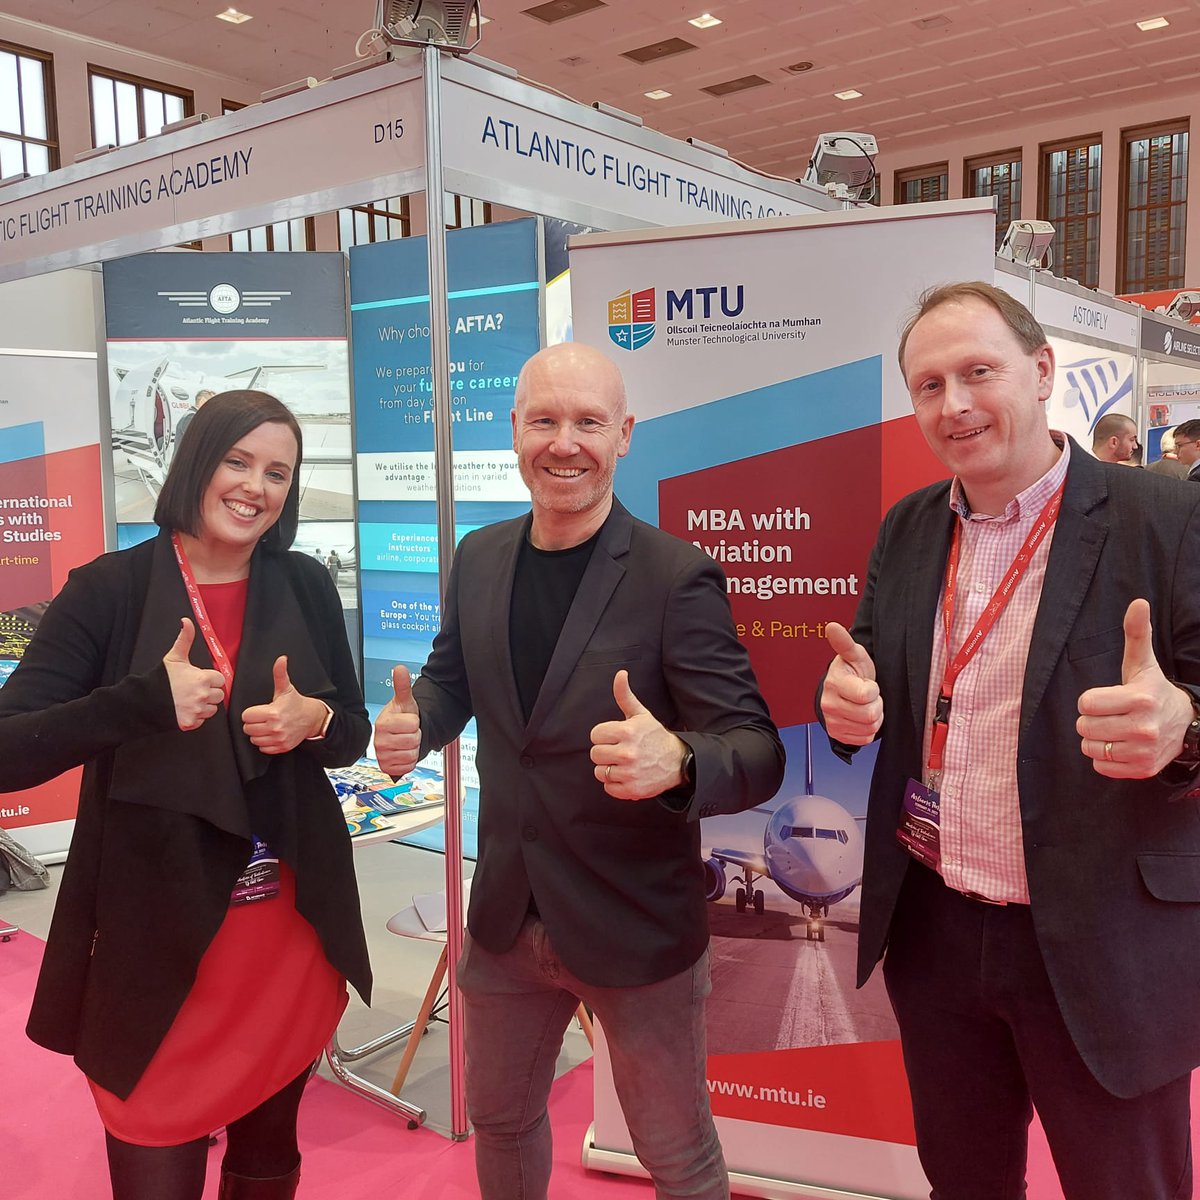 It was great to chat with Mark Duffy at #PilotExpo2023 @MesseBerlin  last weekend ✈👩‍✈️Looking forward to increased collaboration with @Ryanair on @MTU_ie aviation degrees

•MBA with Aviation Mangt
•BA(Hons) Intl. Bus. with Aviation Studies
•BSc(Hons) Global Bus.&Pilot Studies